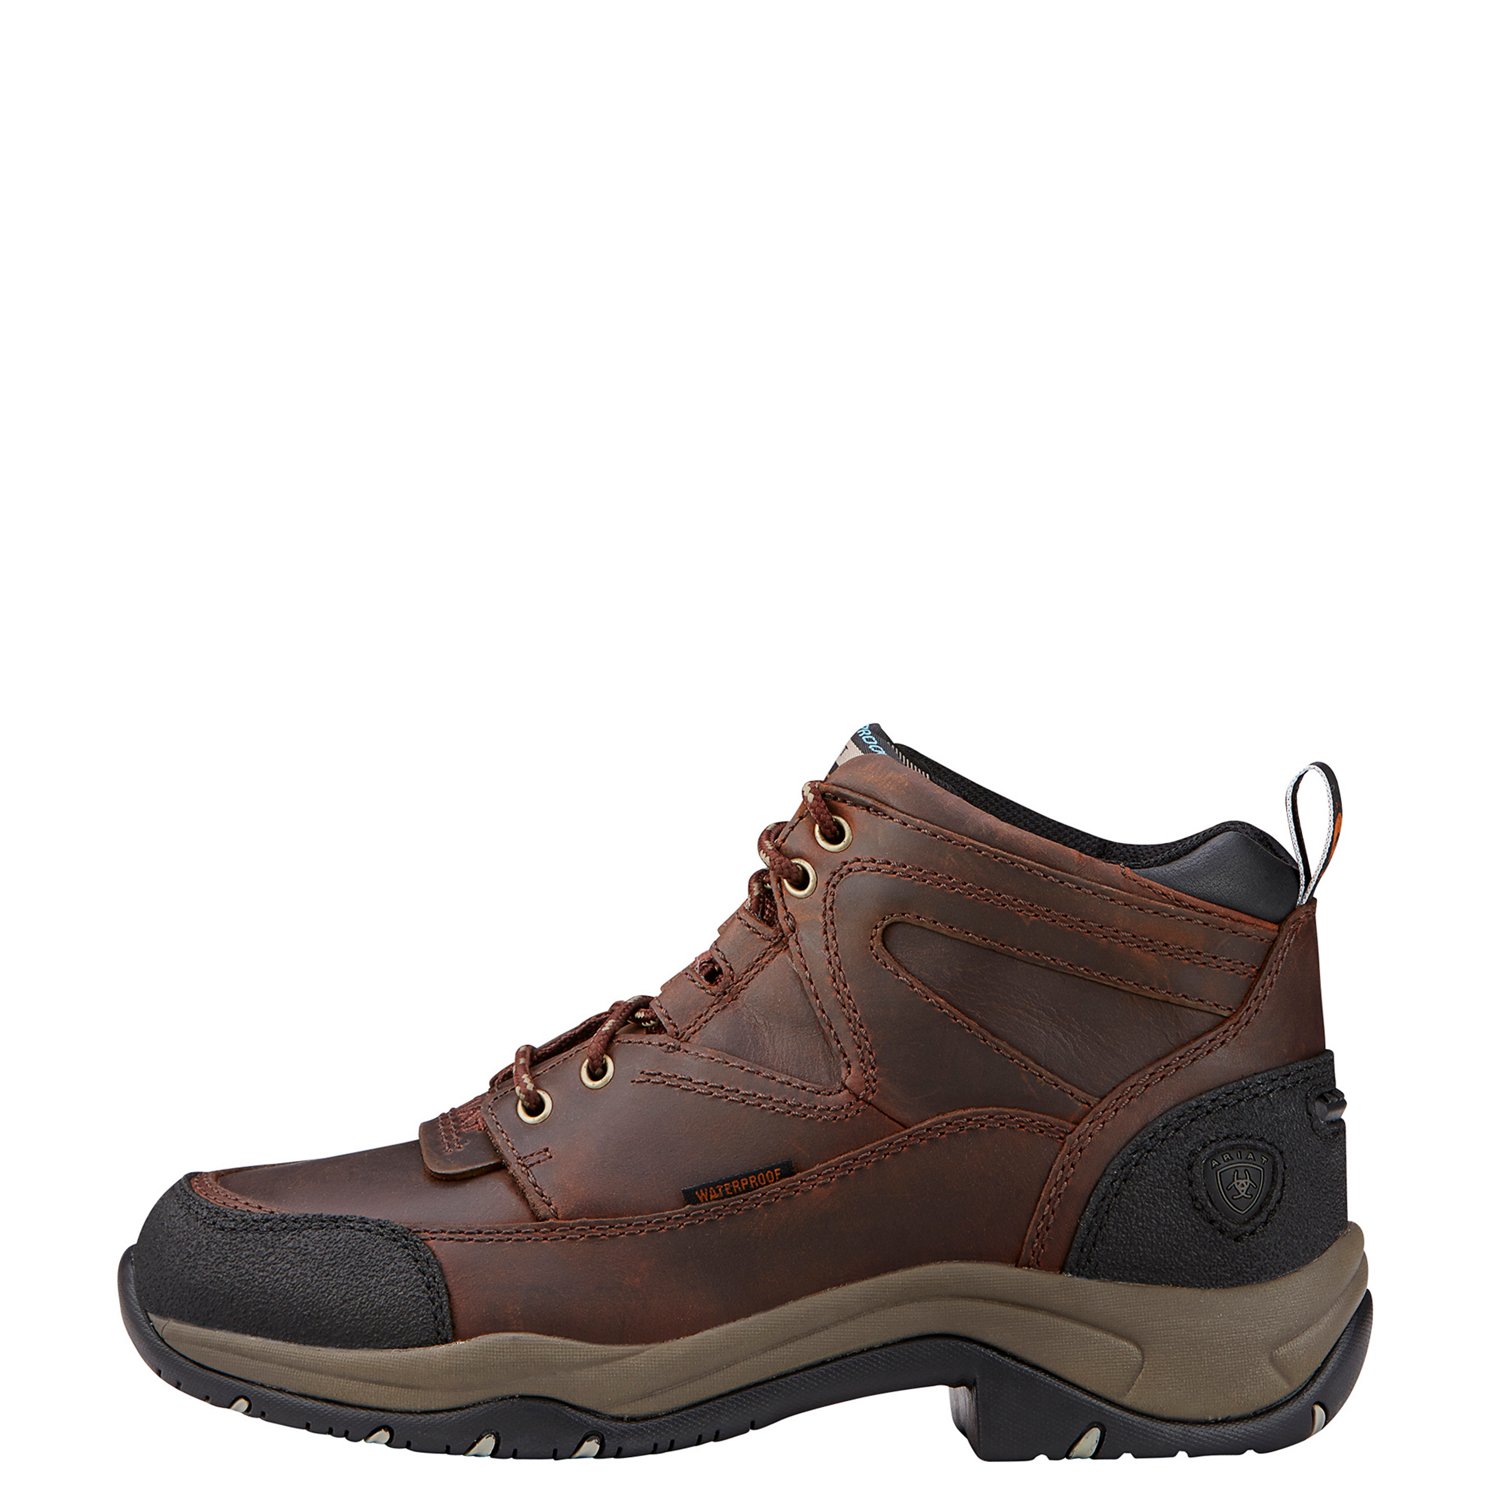 Ariat Women's Terrain Waterproof Boots | Free Shipping at Academy